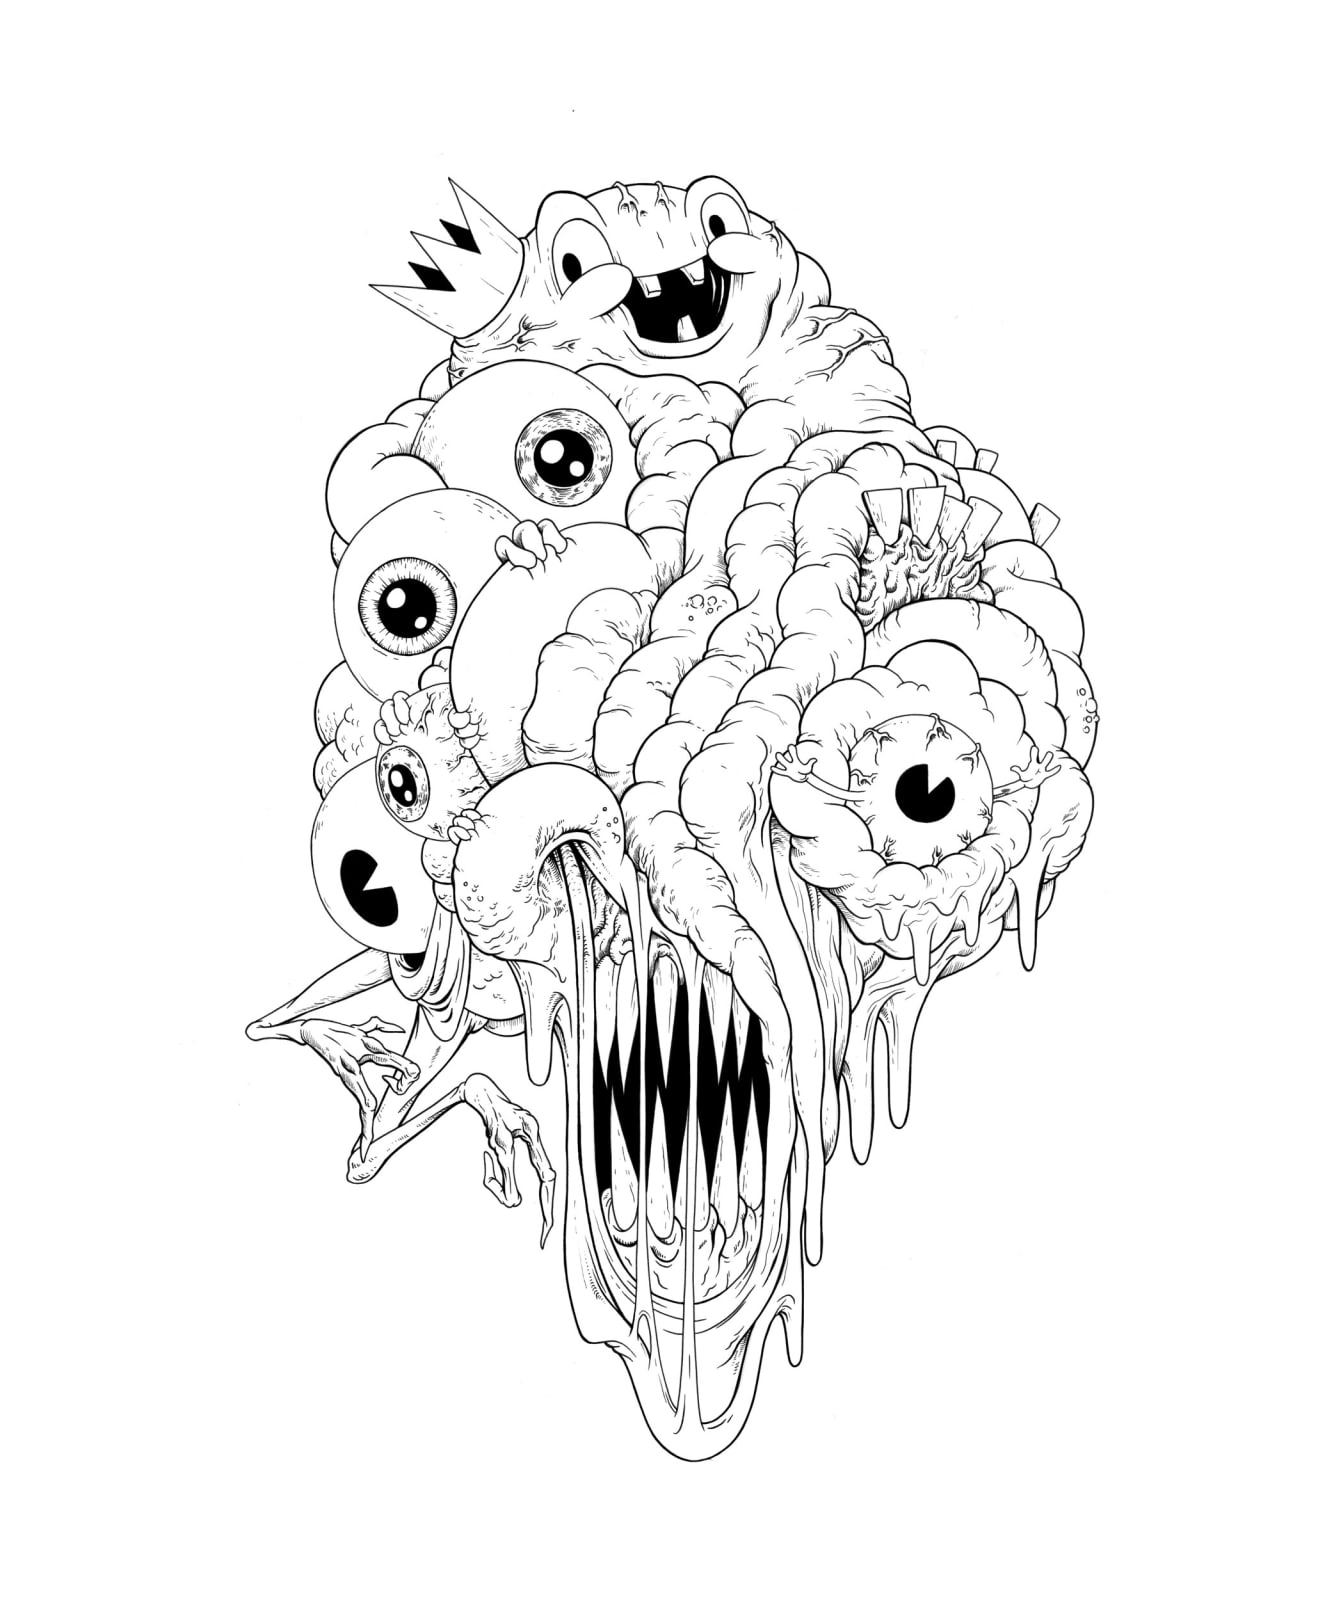 Alex Pardee, The Brightmare King, 2021 | Harman Projects